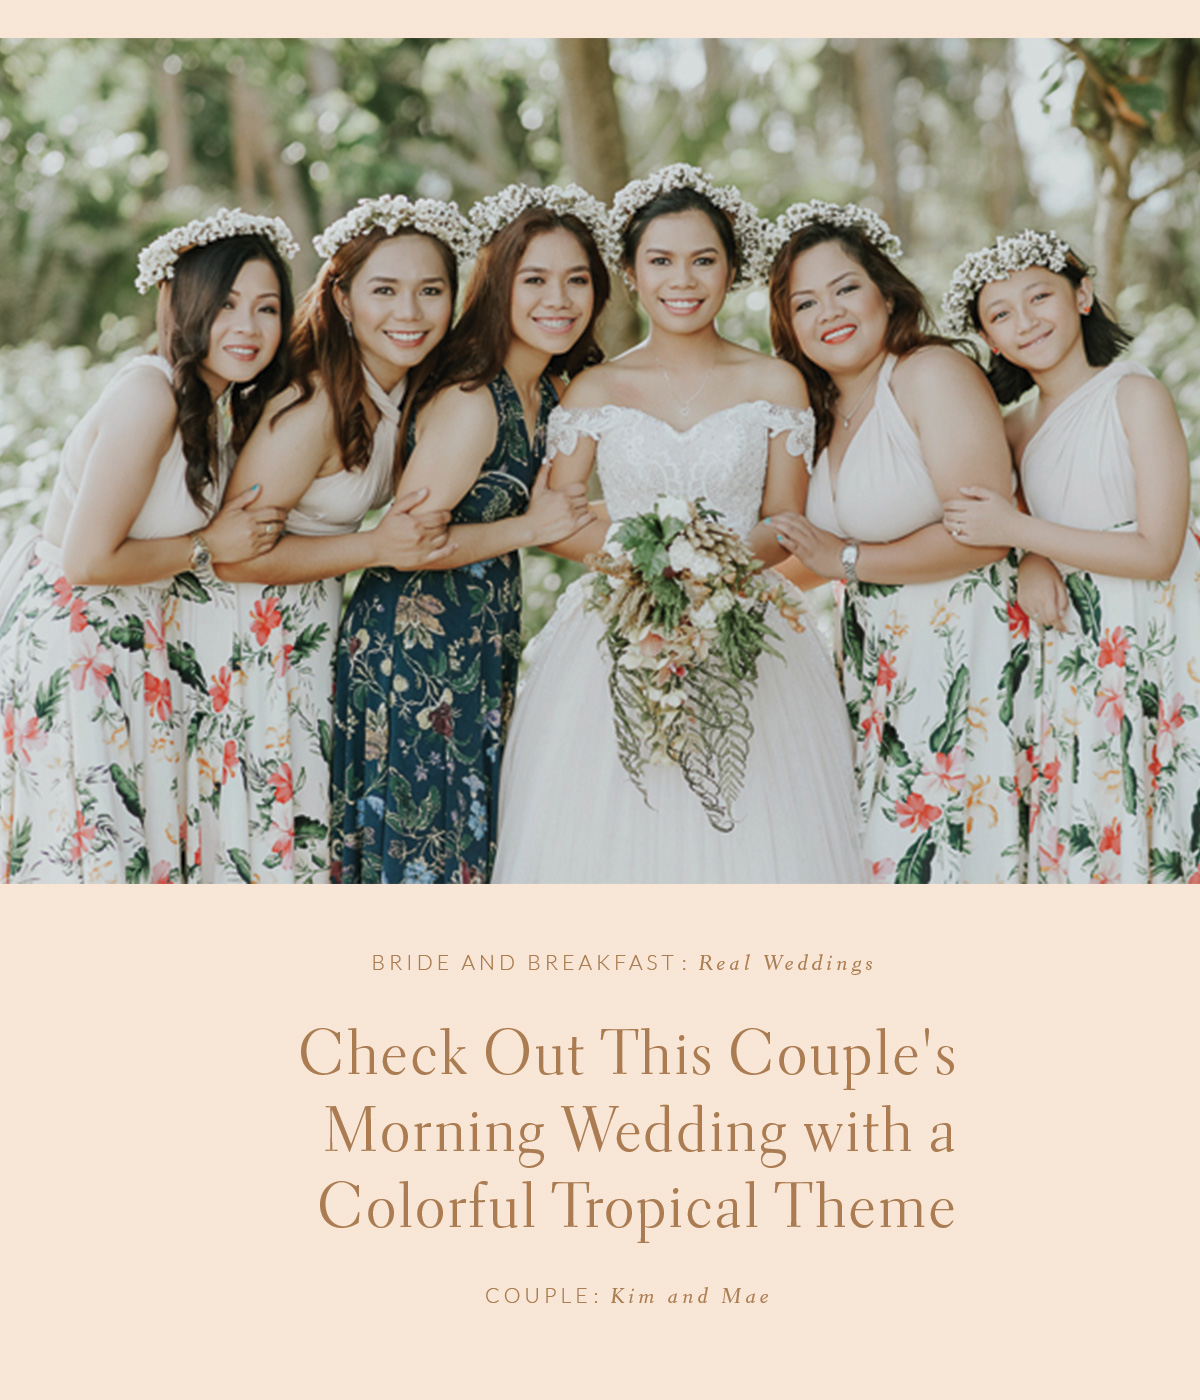 Check Out This Couple's Morning Wedding with a Colorful Tropical Theme